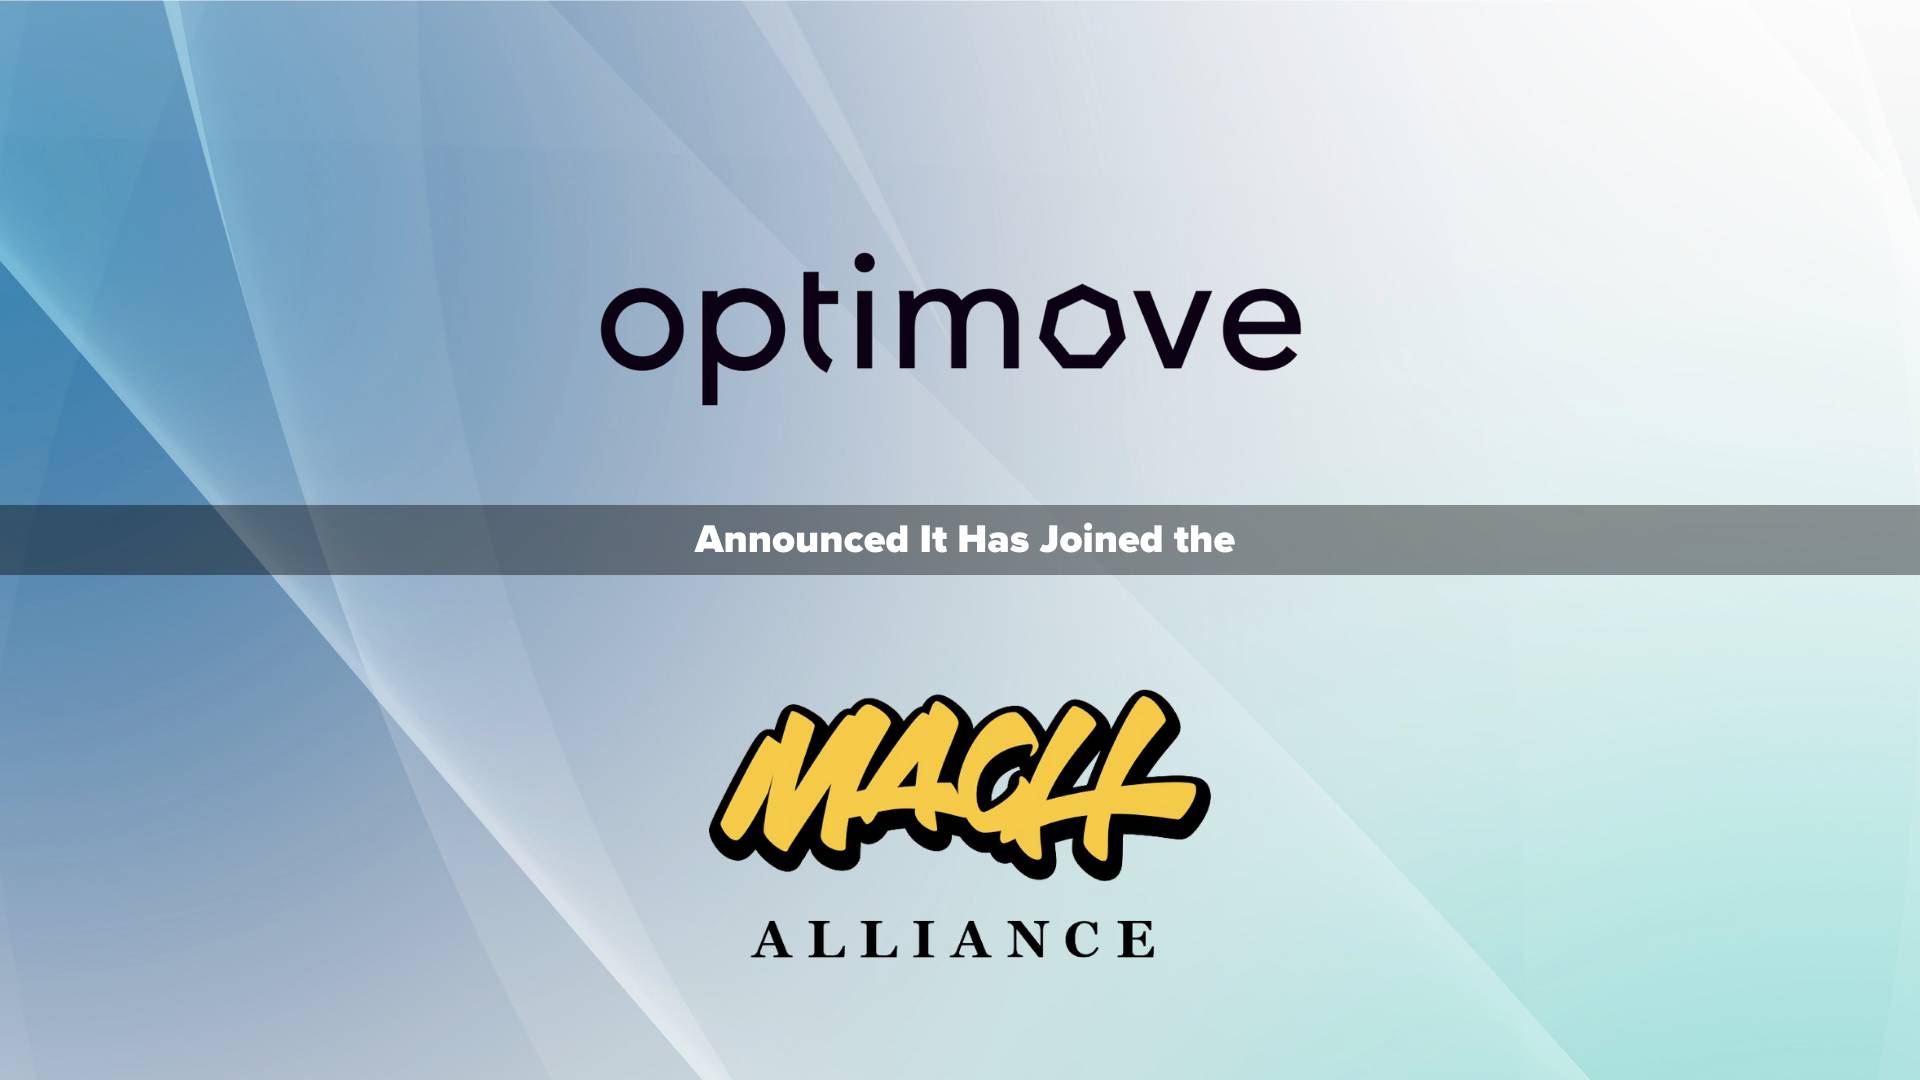 Optimove Joins the MACH Alliance, Opening a New Category for the Non-Profit